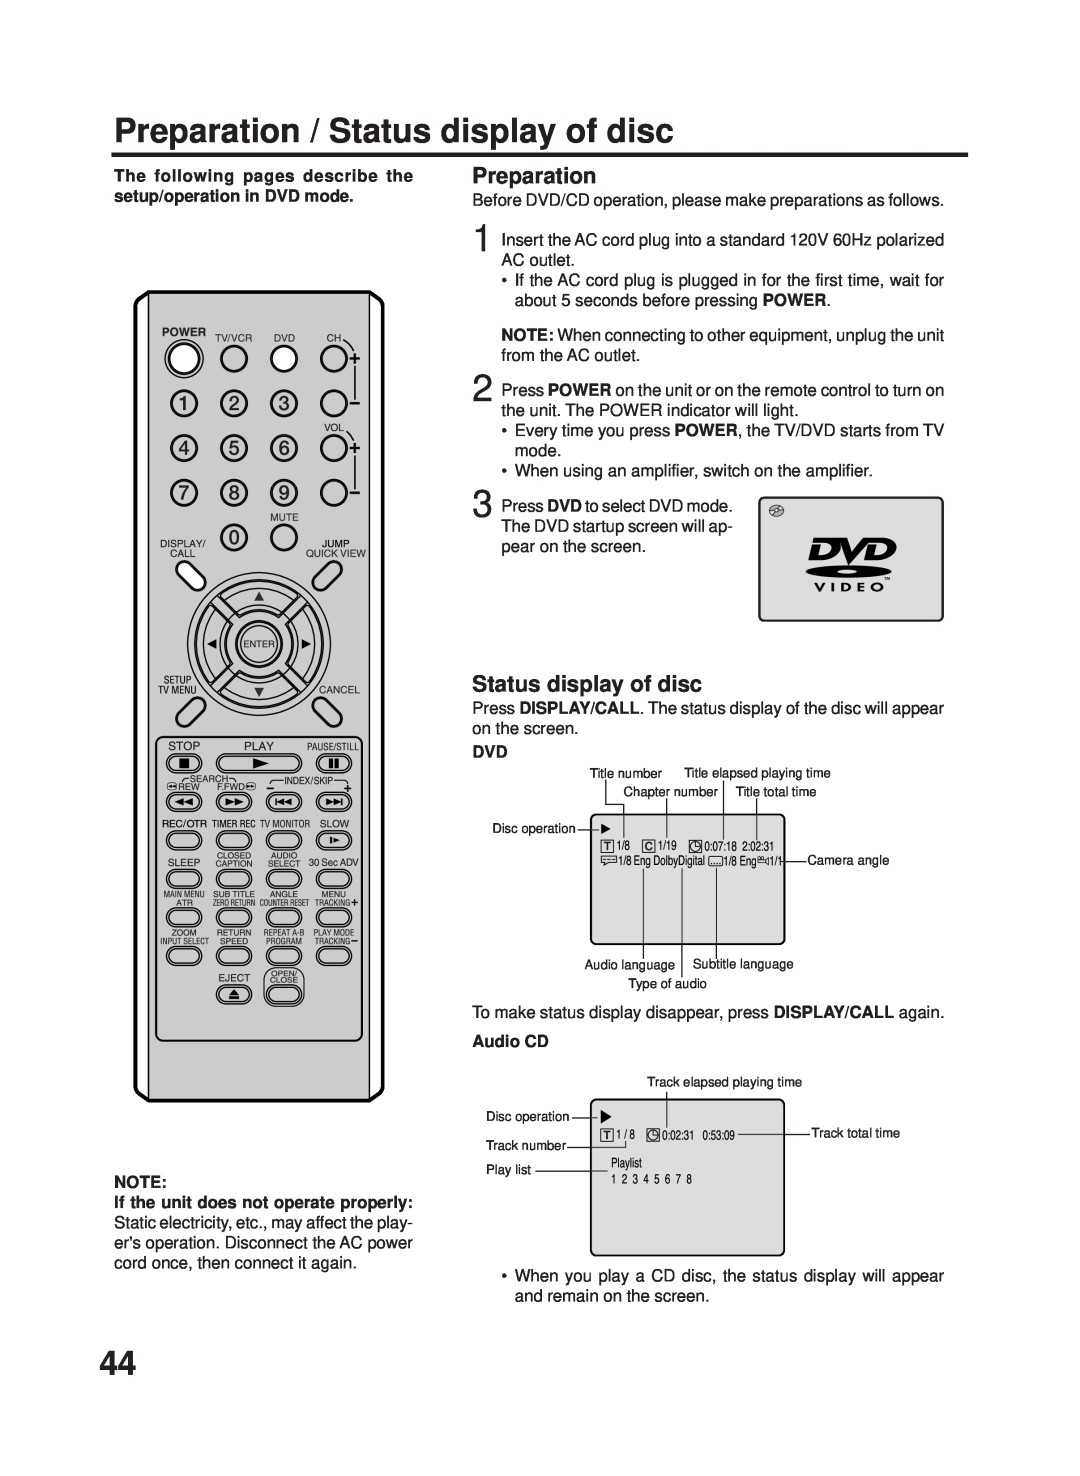 RCA 27F500TDV Preparation / Status display of disc, The following pages describe the setup/operation in DVD mode, Audio CD 